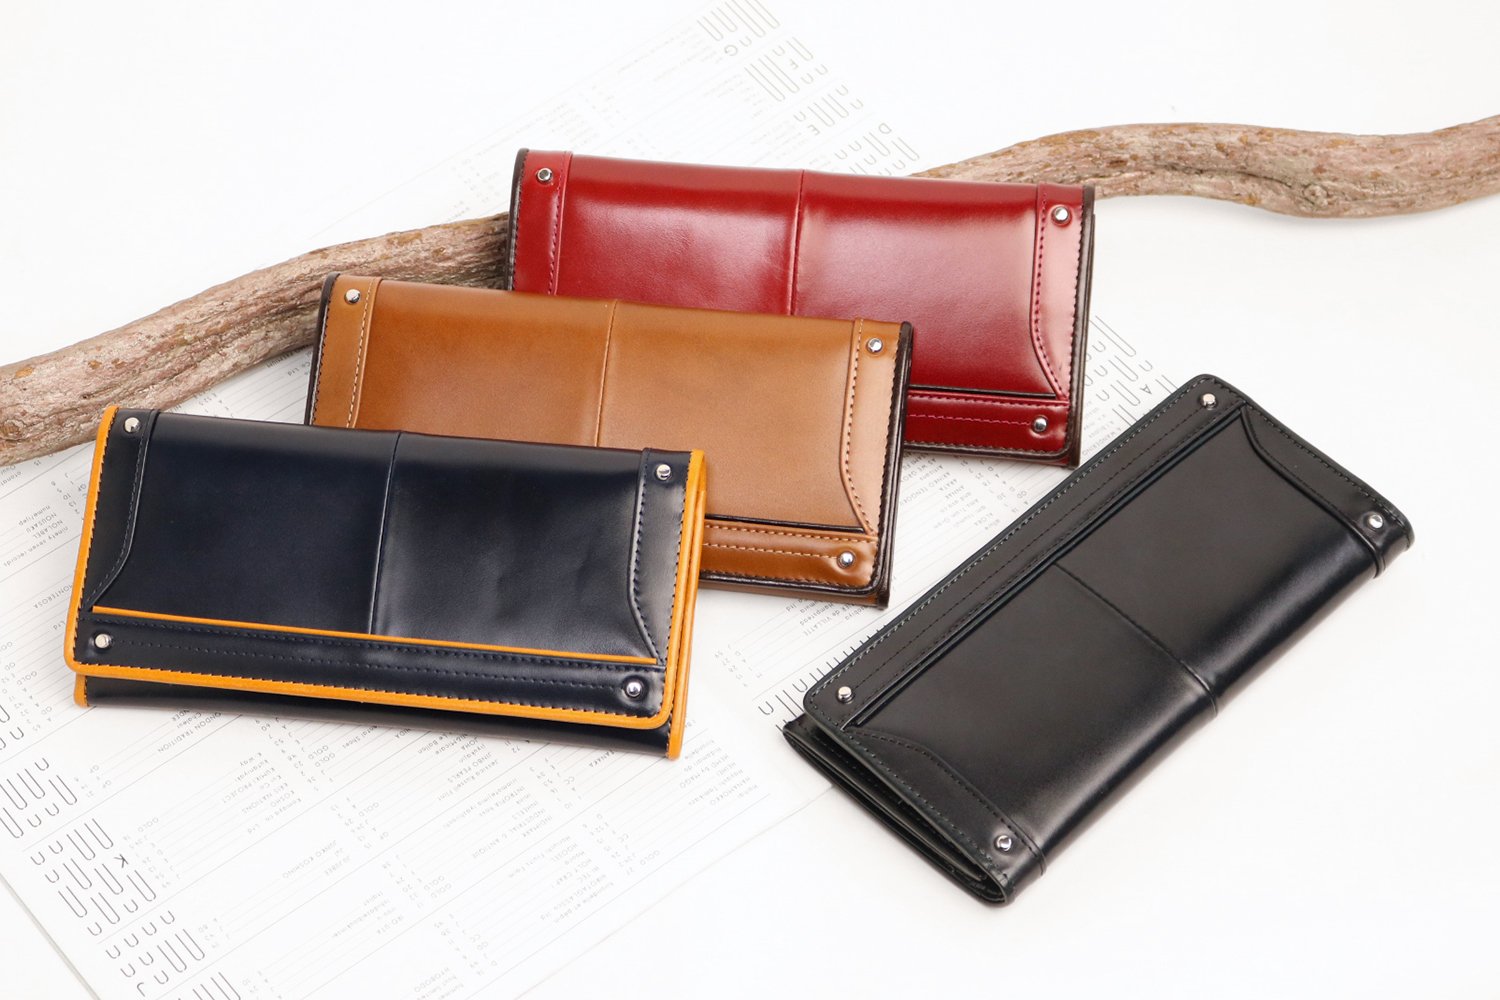 Kiefer neu / Ciao Beautiful uneven dyed leather long wallet